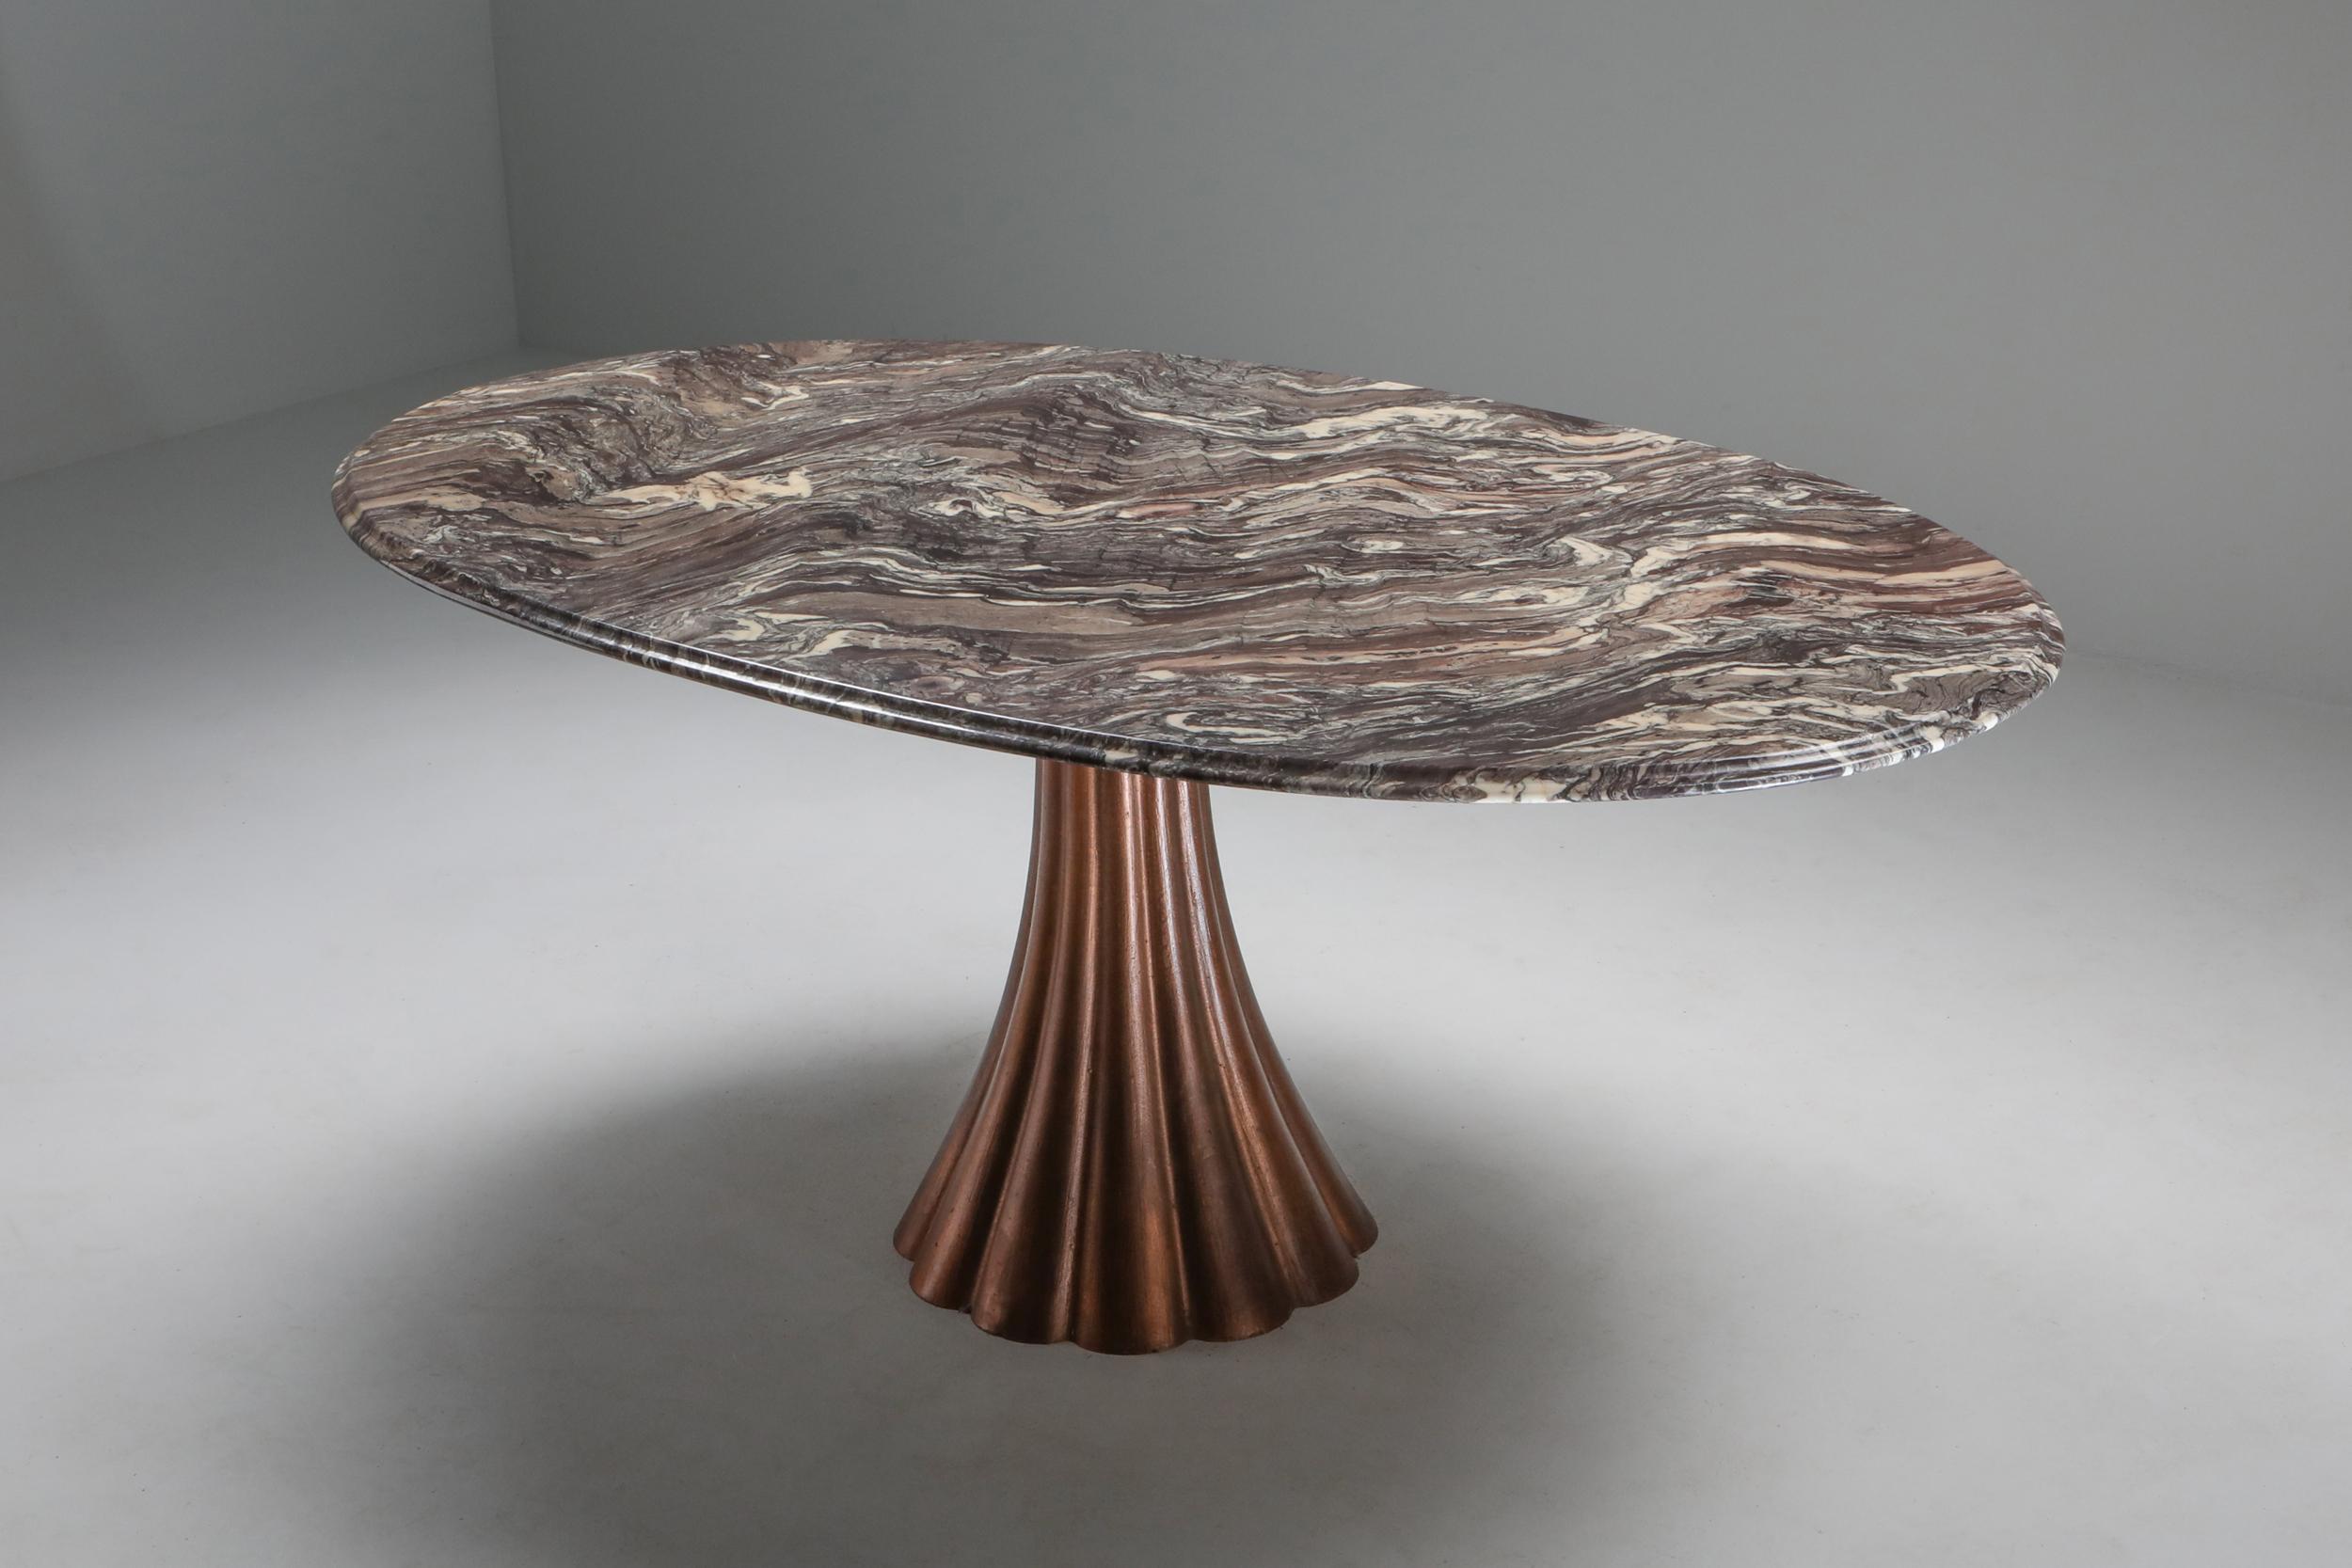 Oval marble dining table on copper patinated cast base, attributed to Angelo Mangiarotti, Italy, 1970s
Postmodern piece with stunning decorative qualities.
The marble seems to move in a Missoni wave pattern, add this to the copper patinated cast